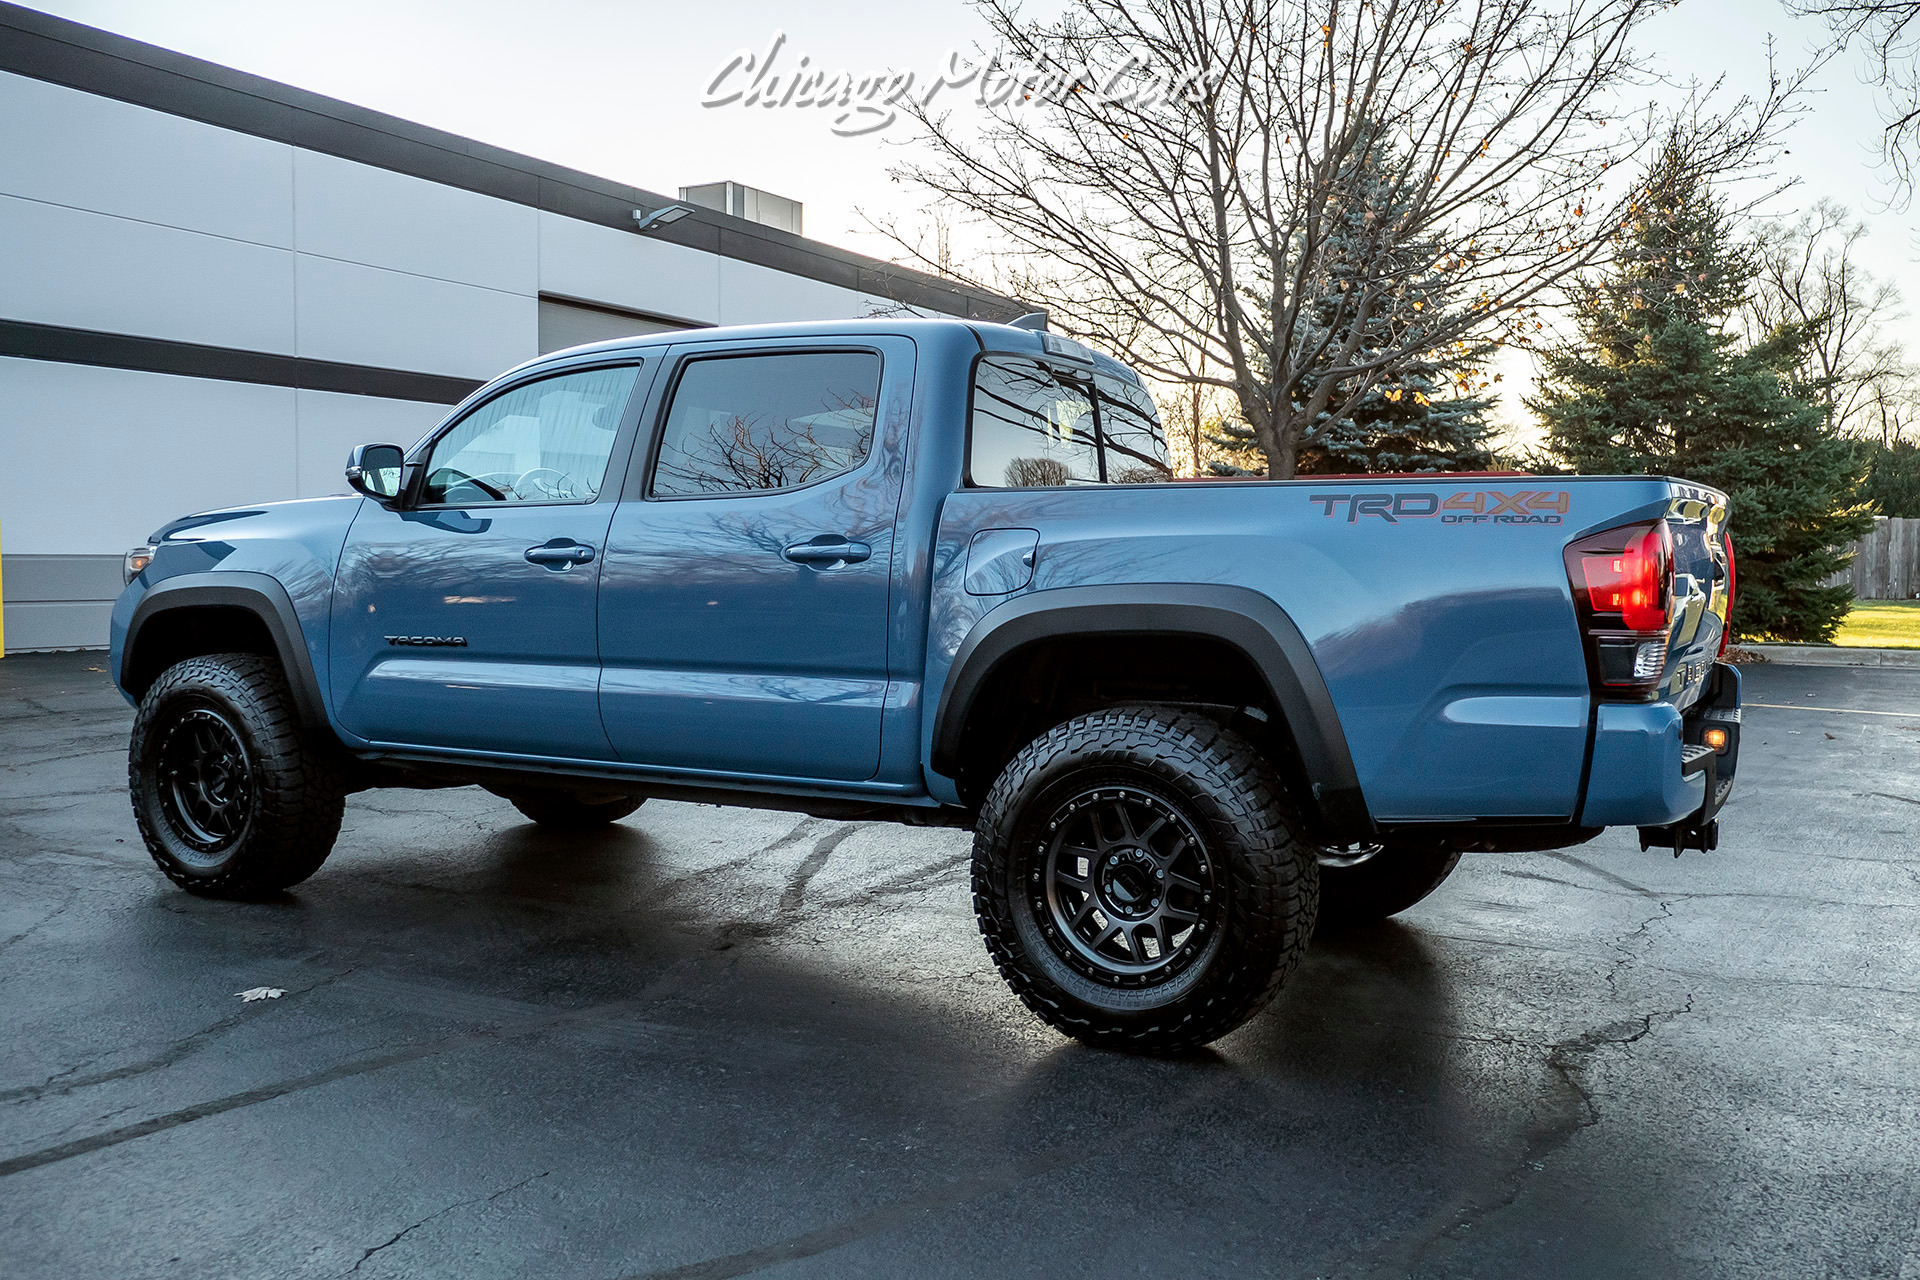 Used-2019-Toyota-Tacoma-TRD-Off-Road-4x4-Lifted-with-Upgraded-Tires-RARE-Calvary-Blue